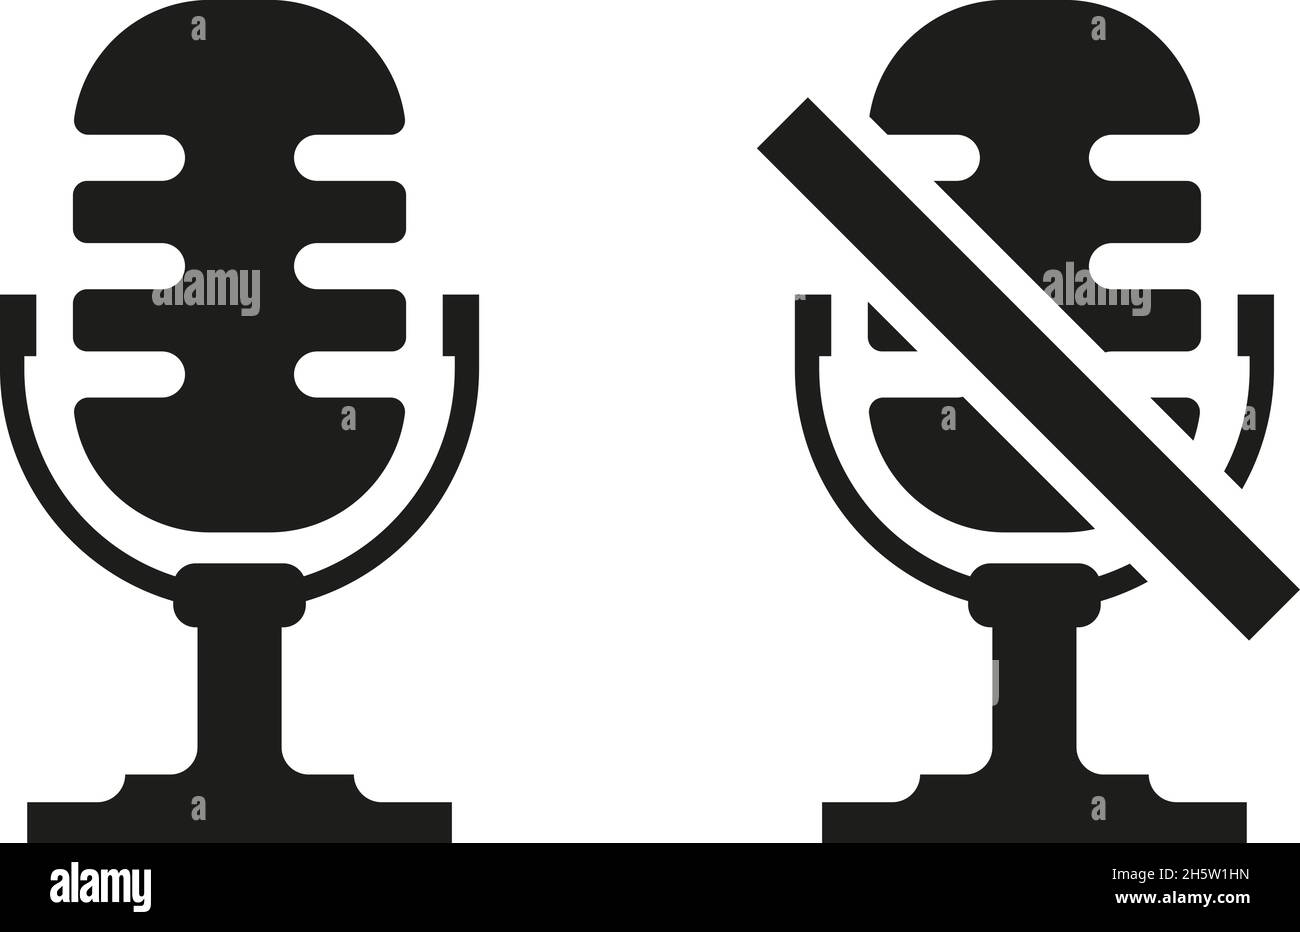 black microphone icon on and off, vector illustration Stock Vector